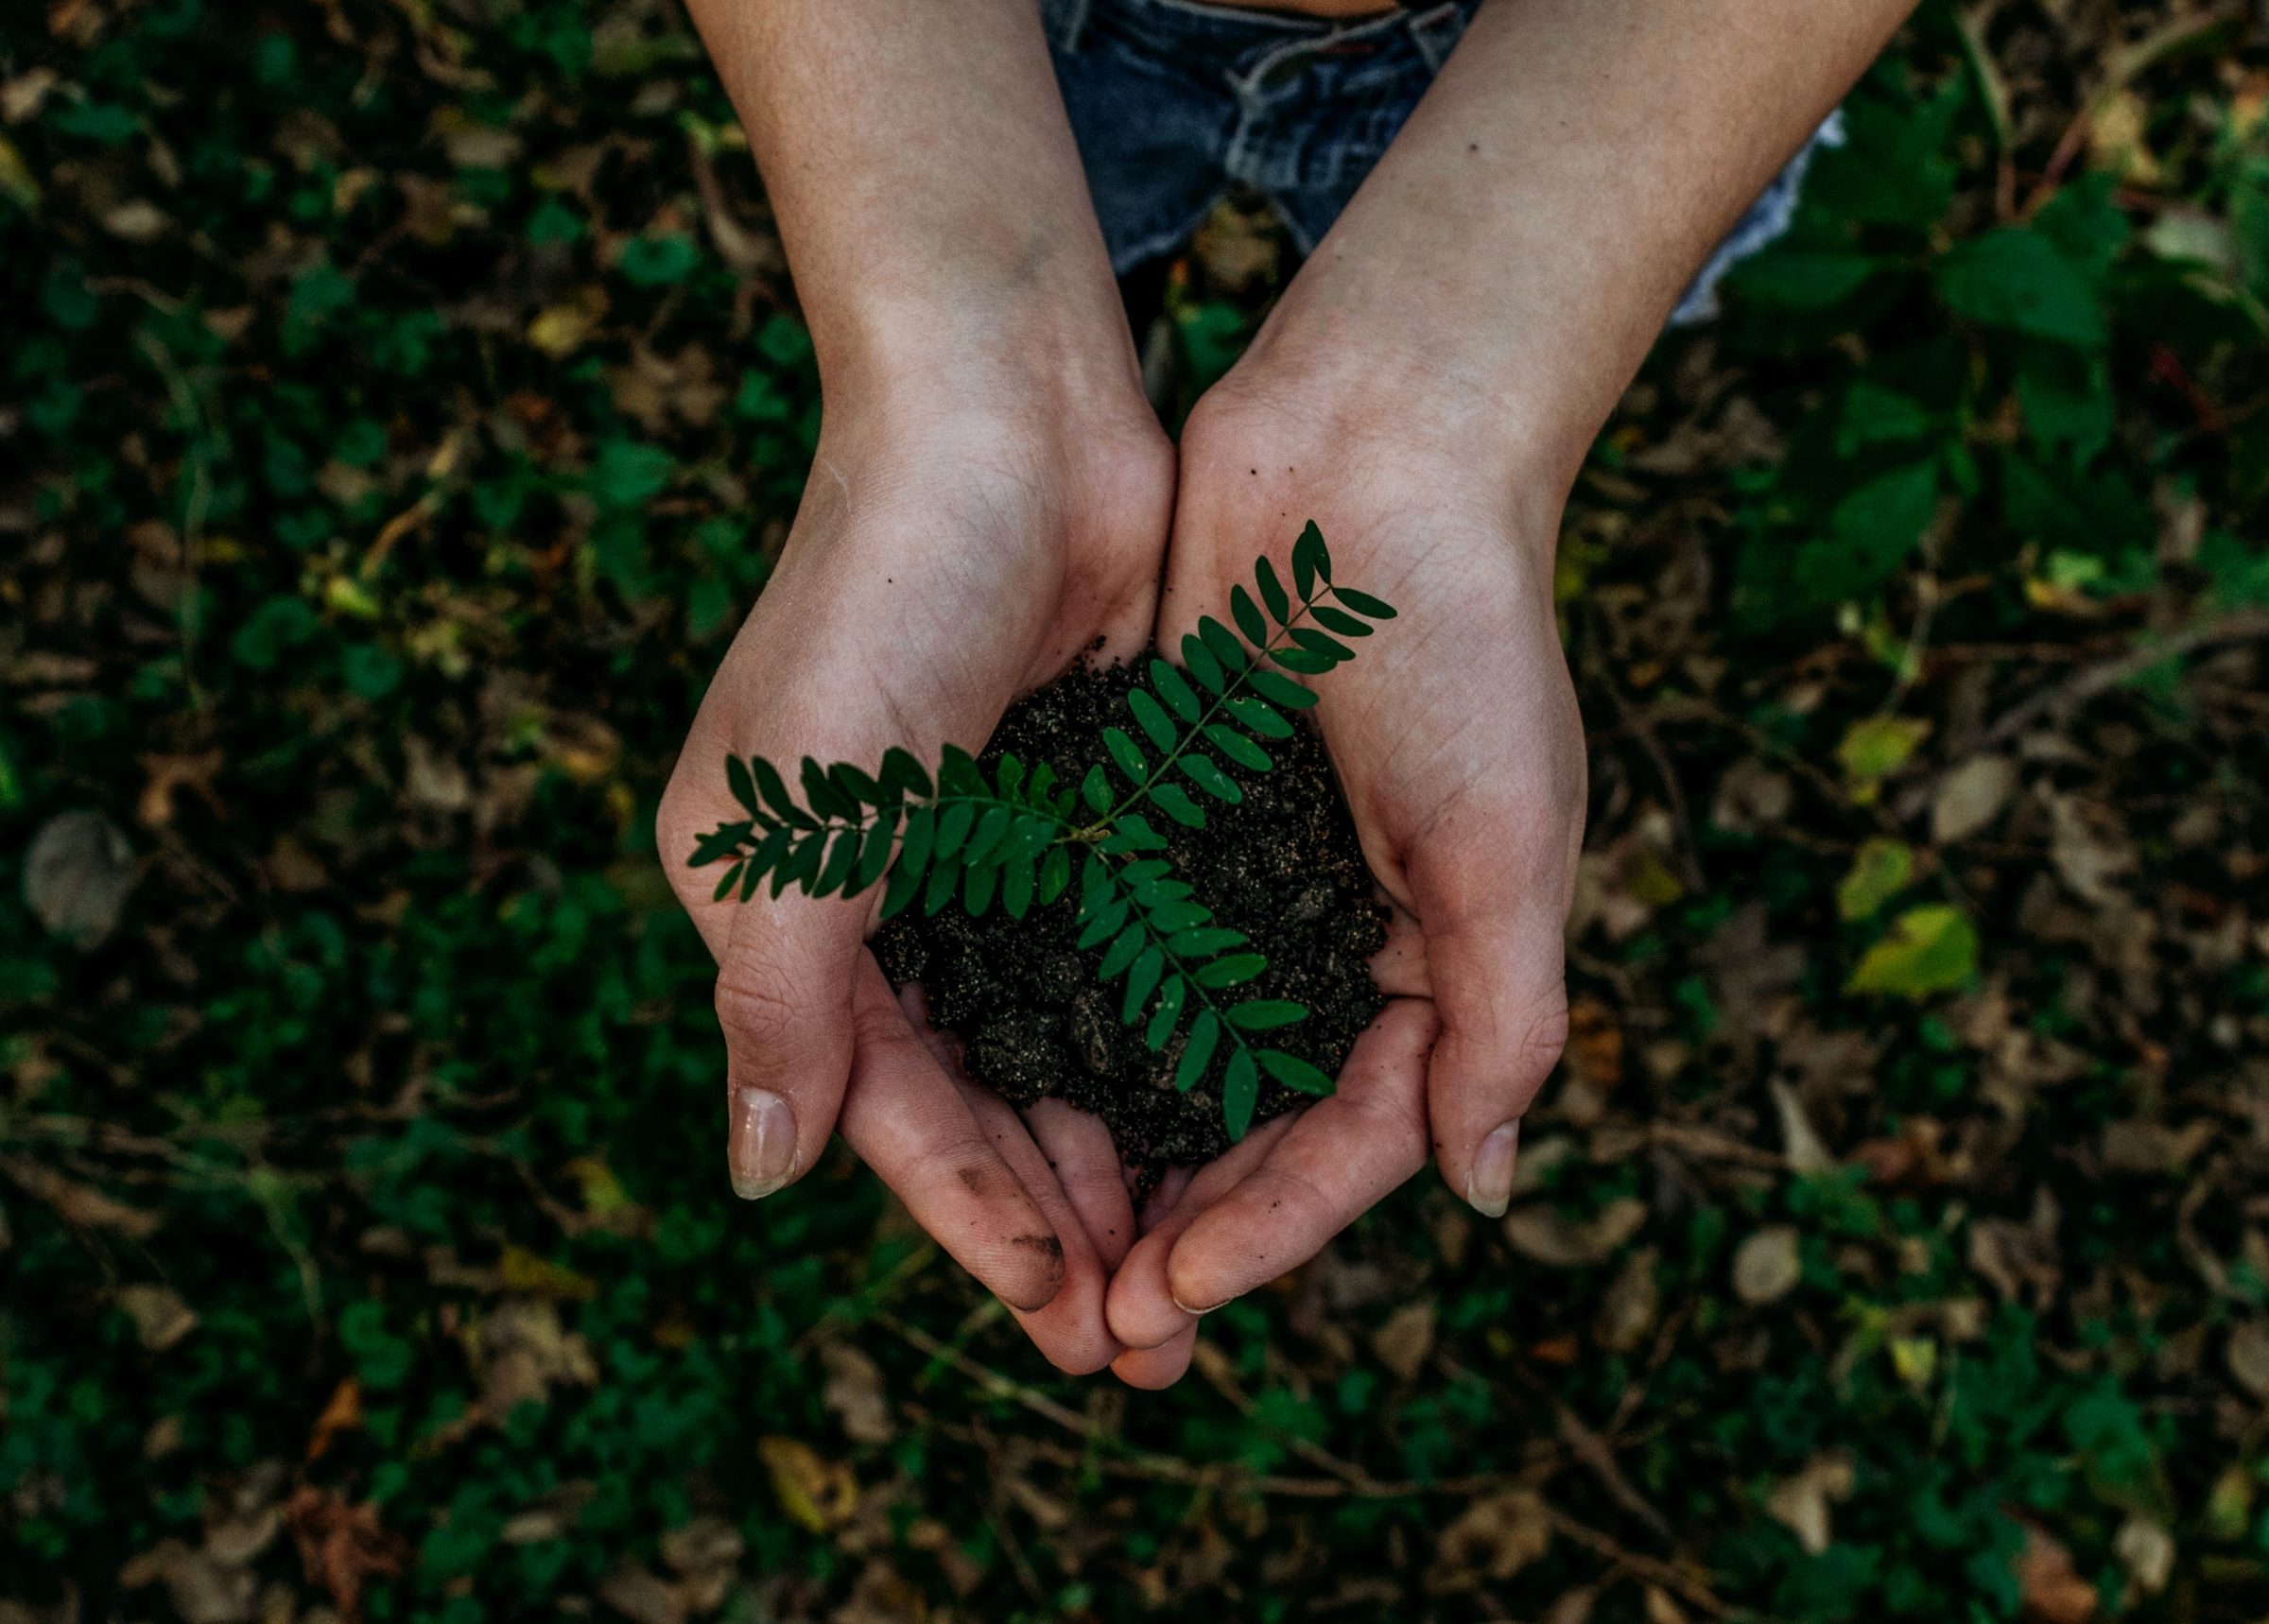 A sapling in a pair of hands. PD, image from https://unsplash.com/photos/x8ZStukS2PM